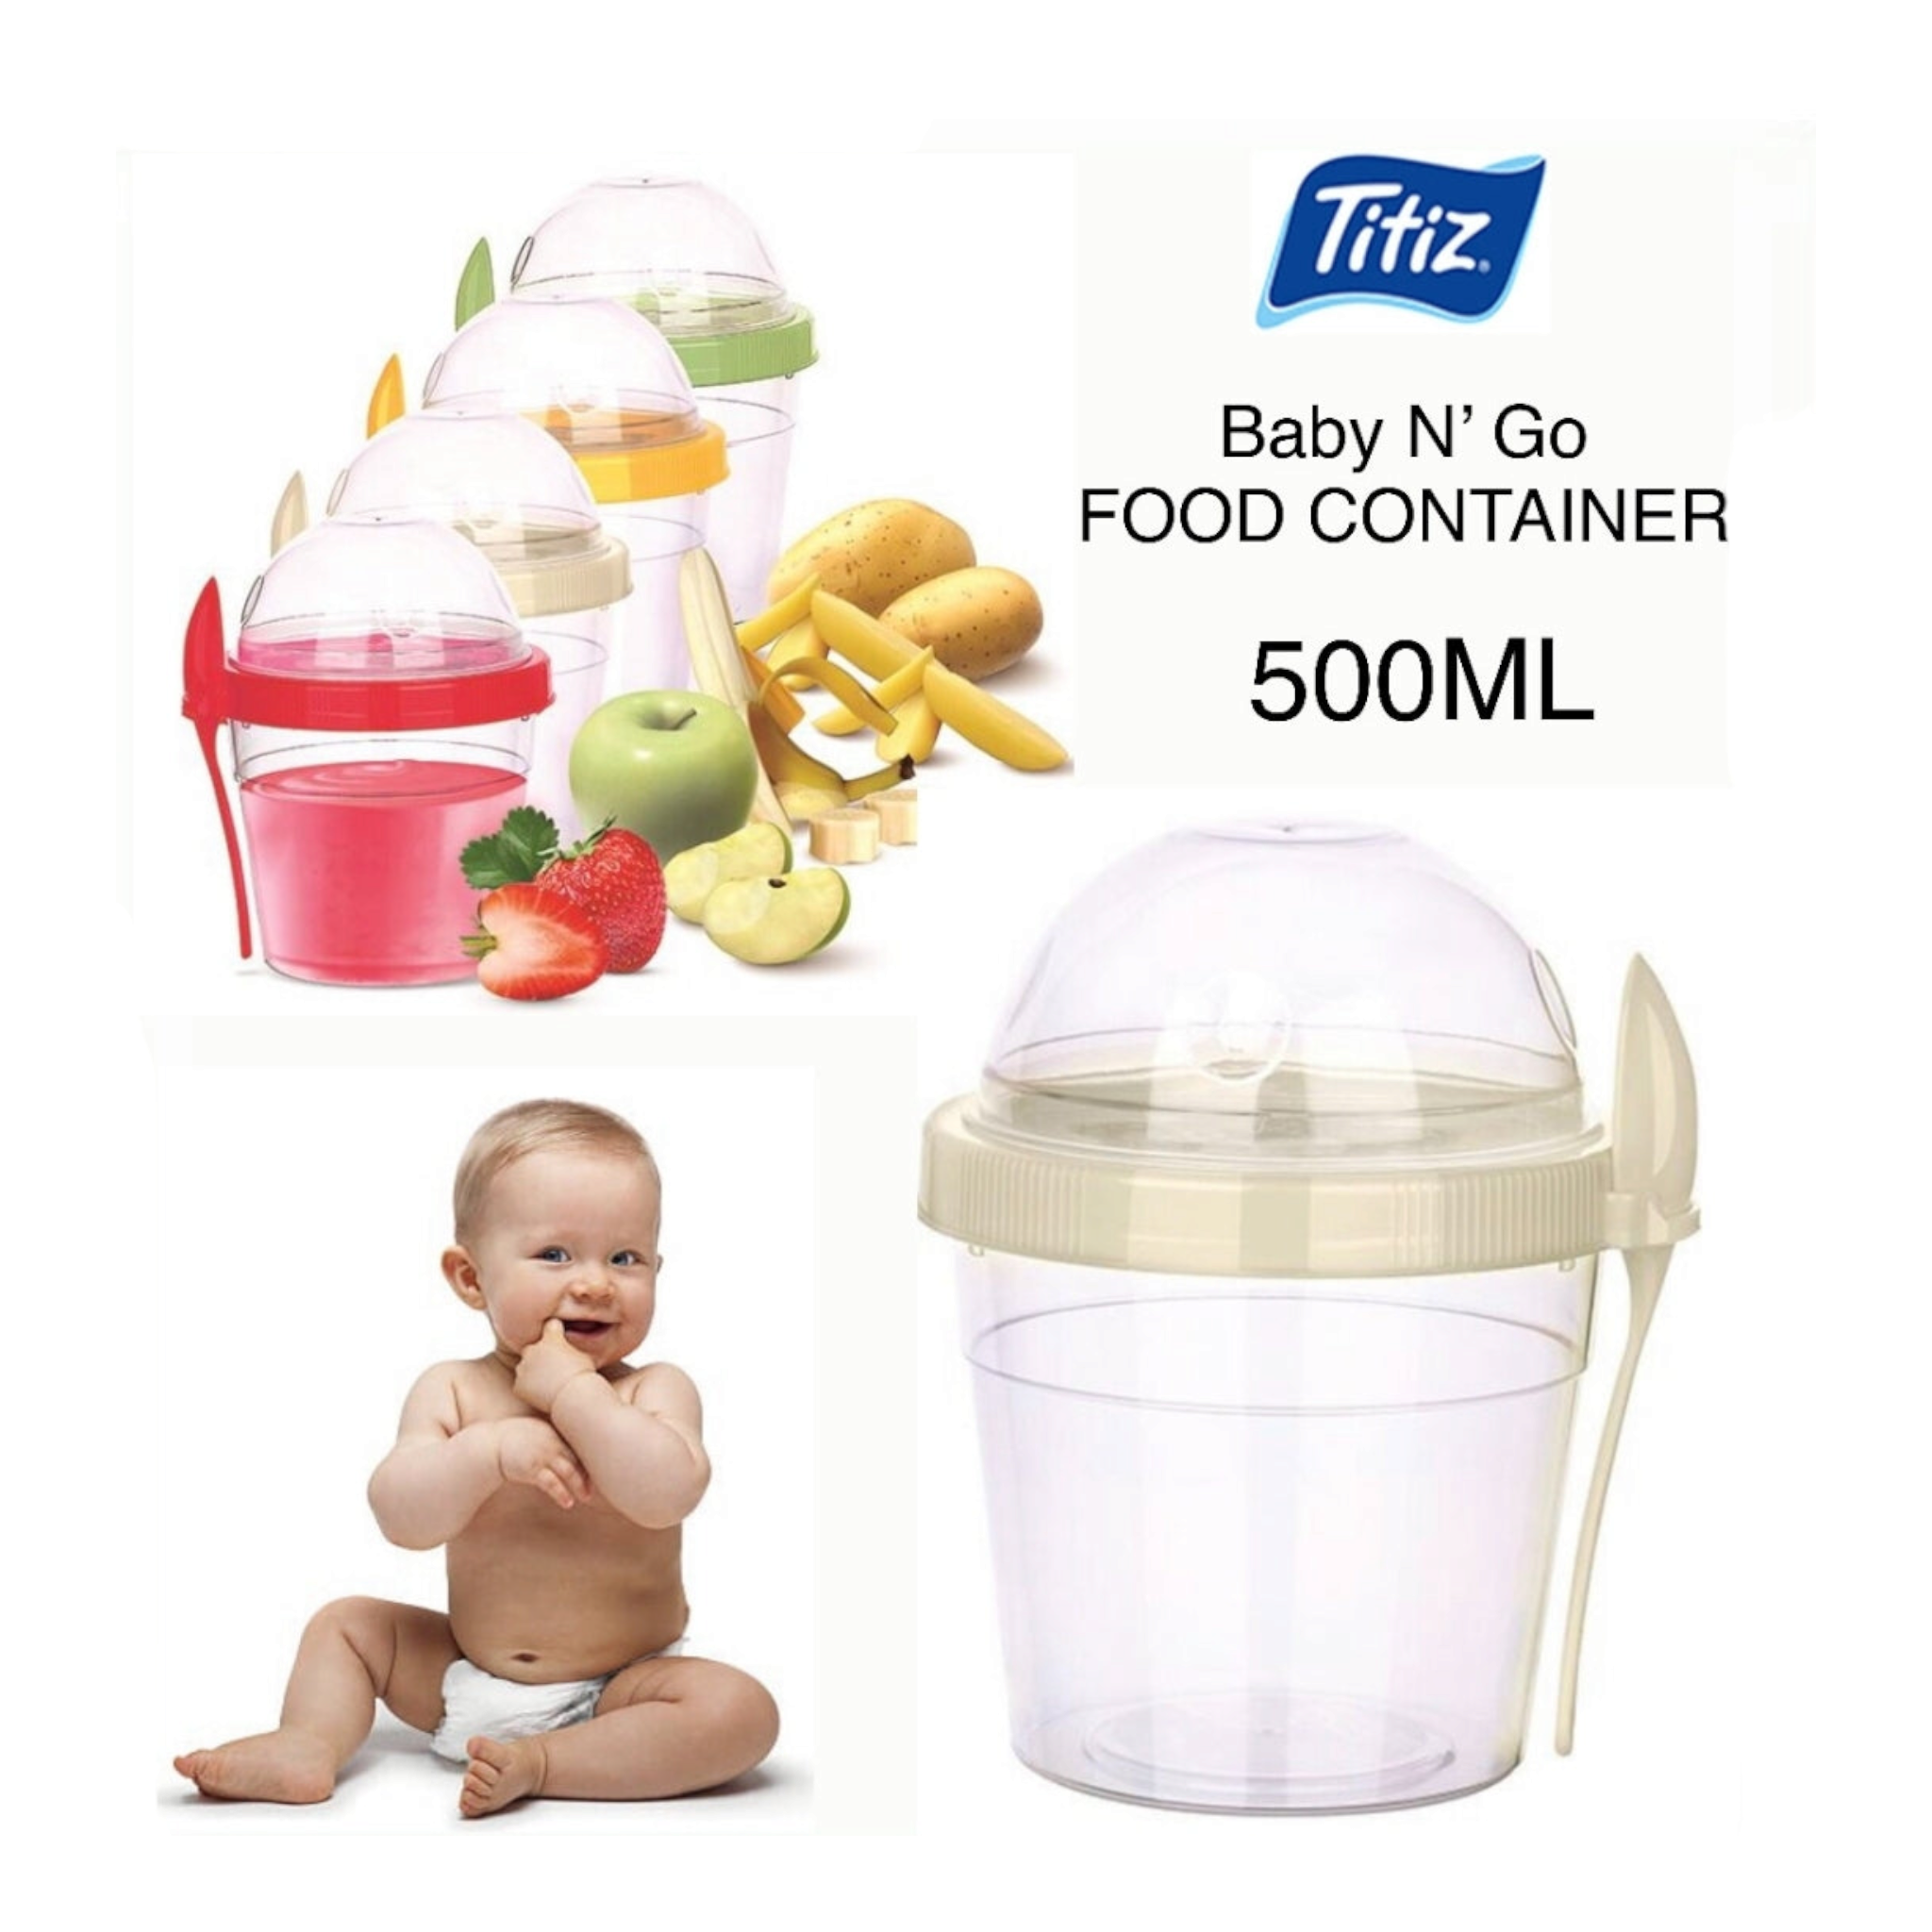 Titiz Baby and Go Food Container 500ml AP-9445